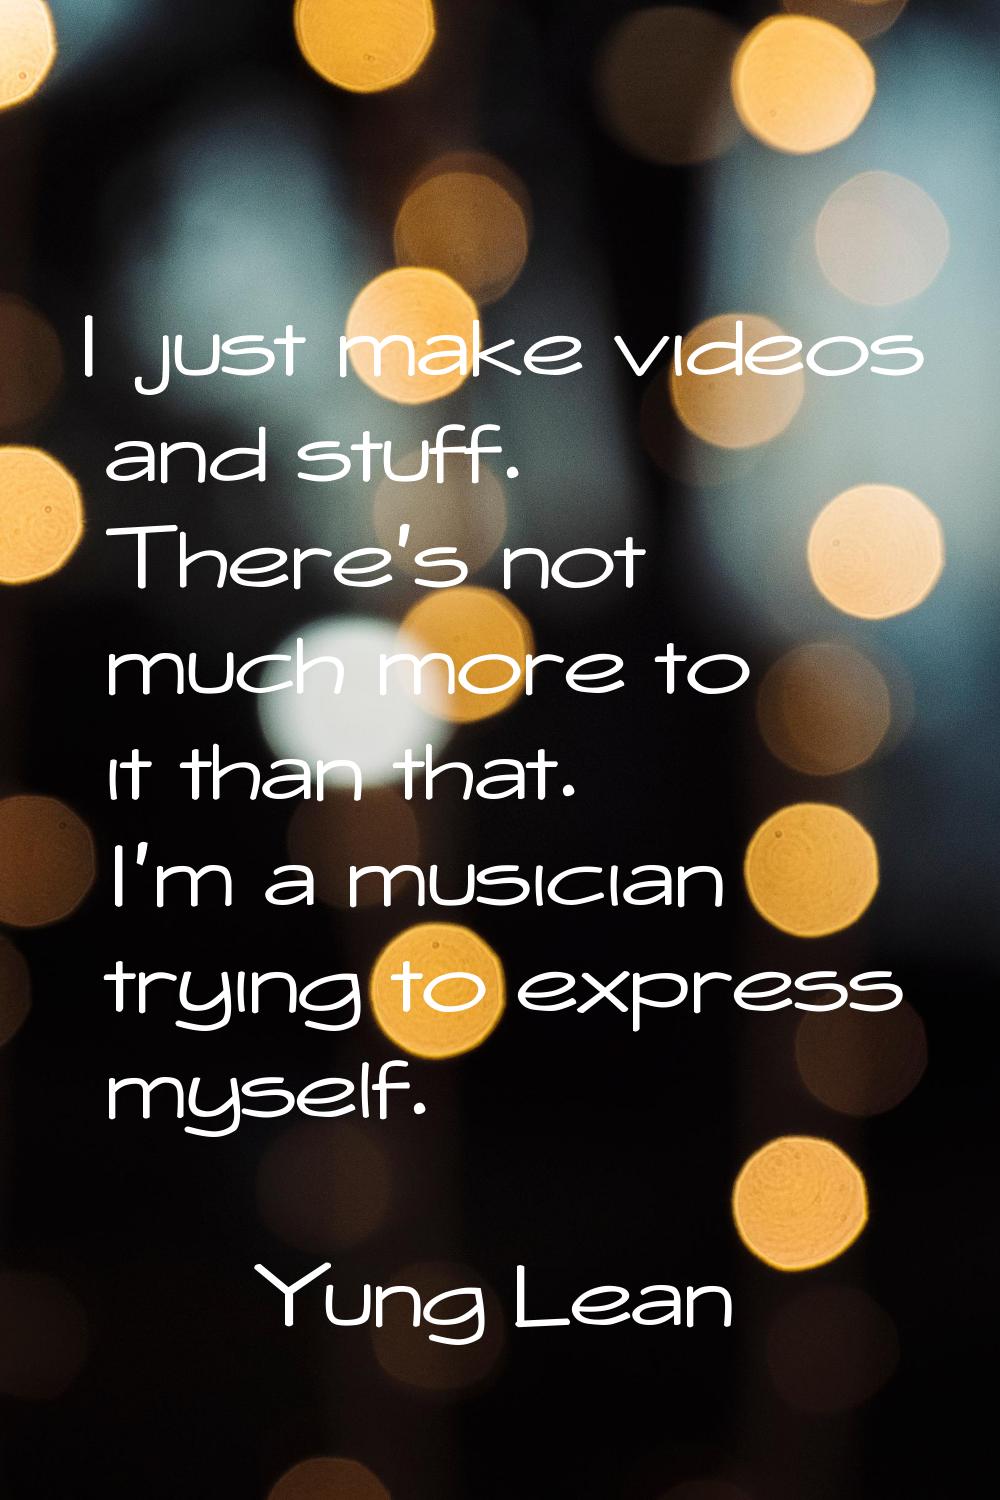 I just make videos and stuff. There's not much more to it than that. I'm a musician trying to expre